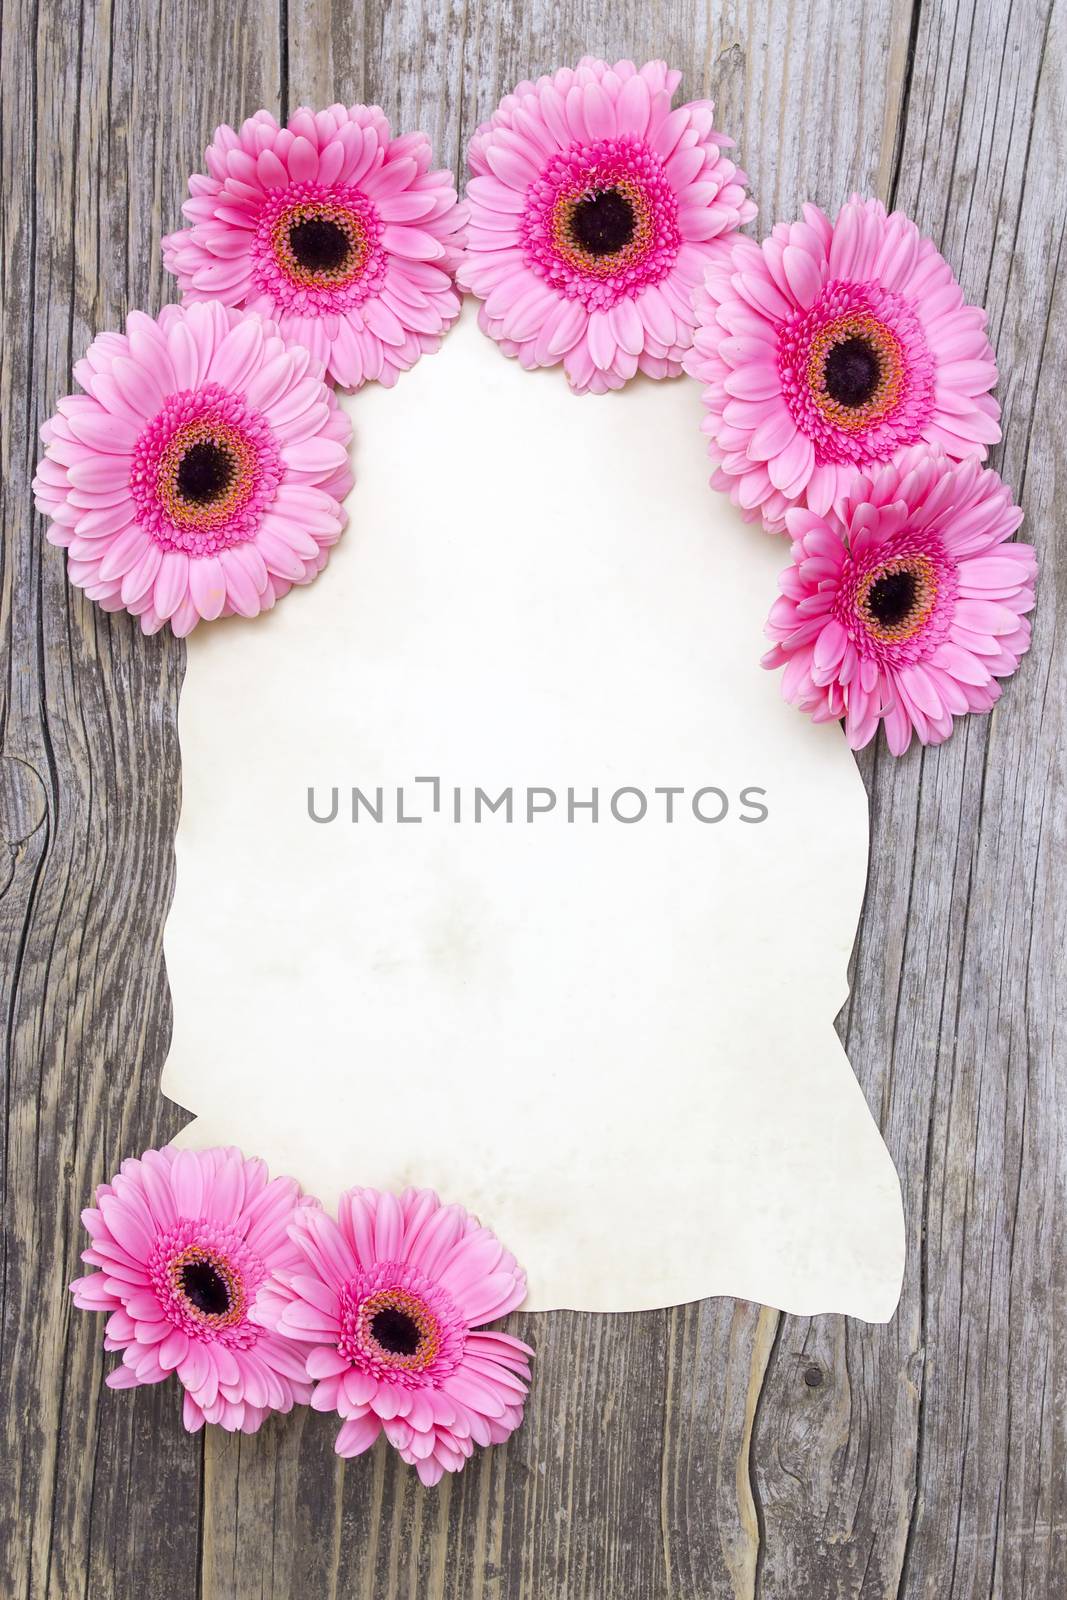 pink gerberas and empty sheet on a wooden board, vintage style by miradrozdowski